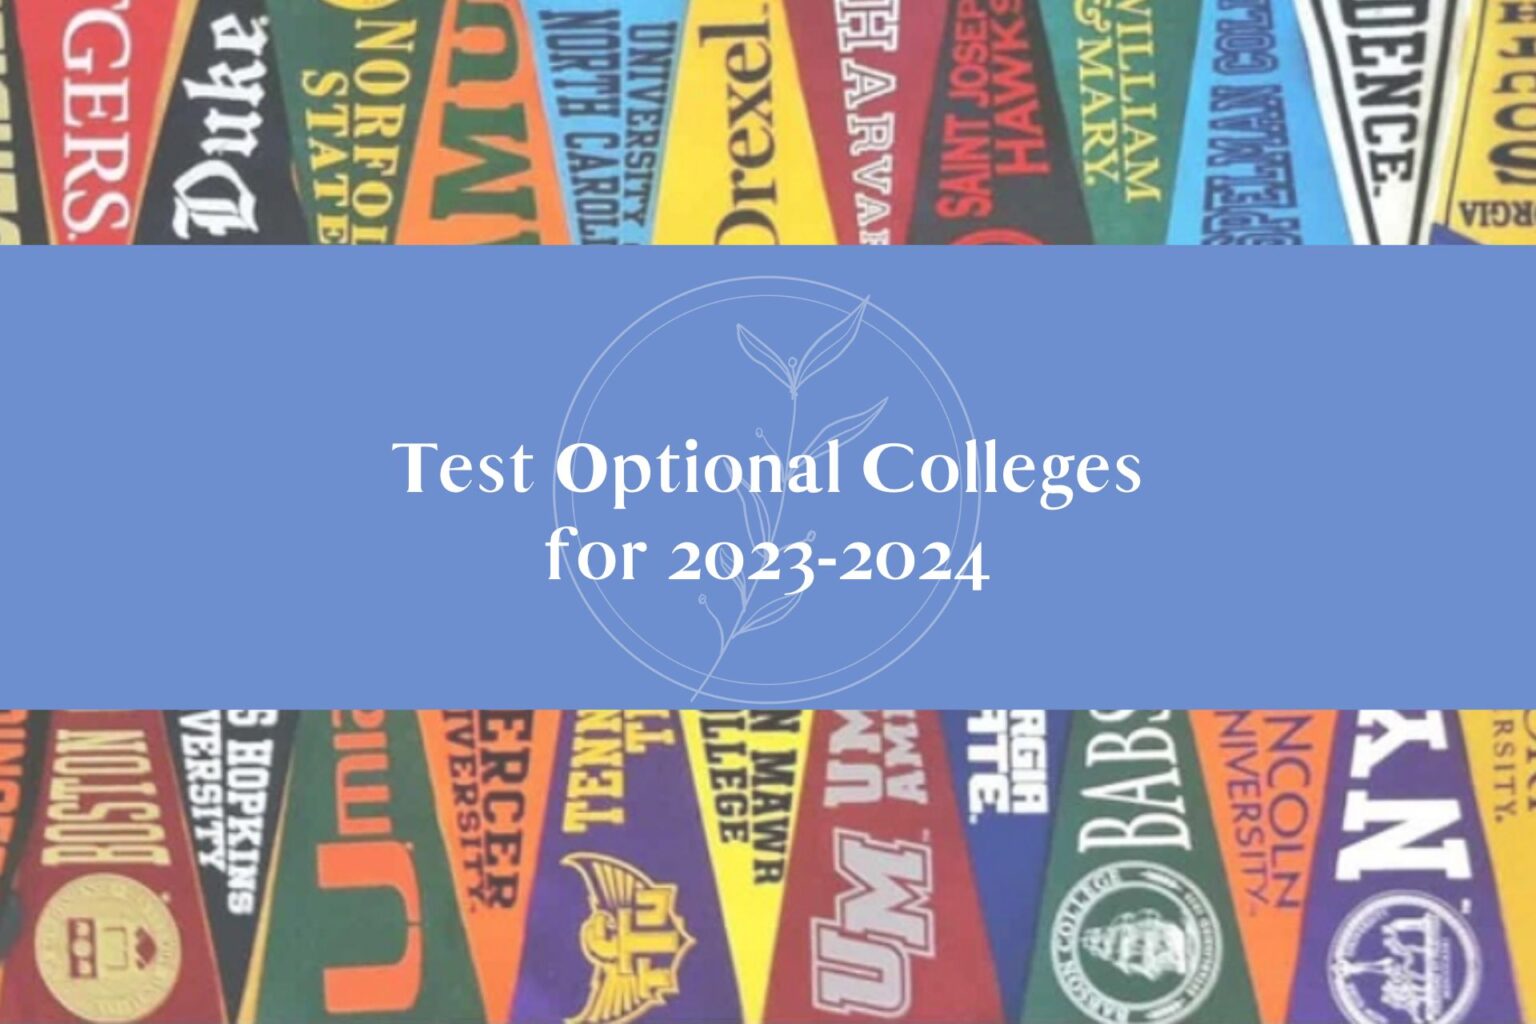 Test Optional Colleges for 2023-2024 | The College Curators